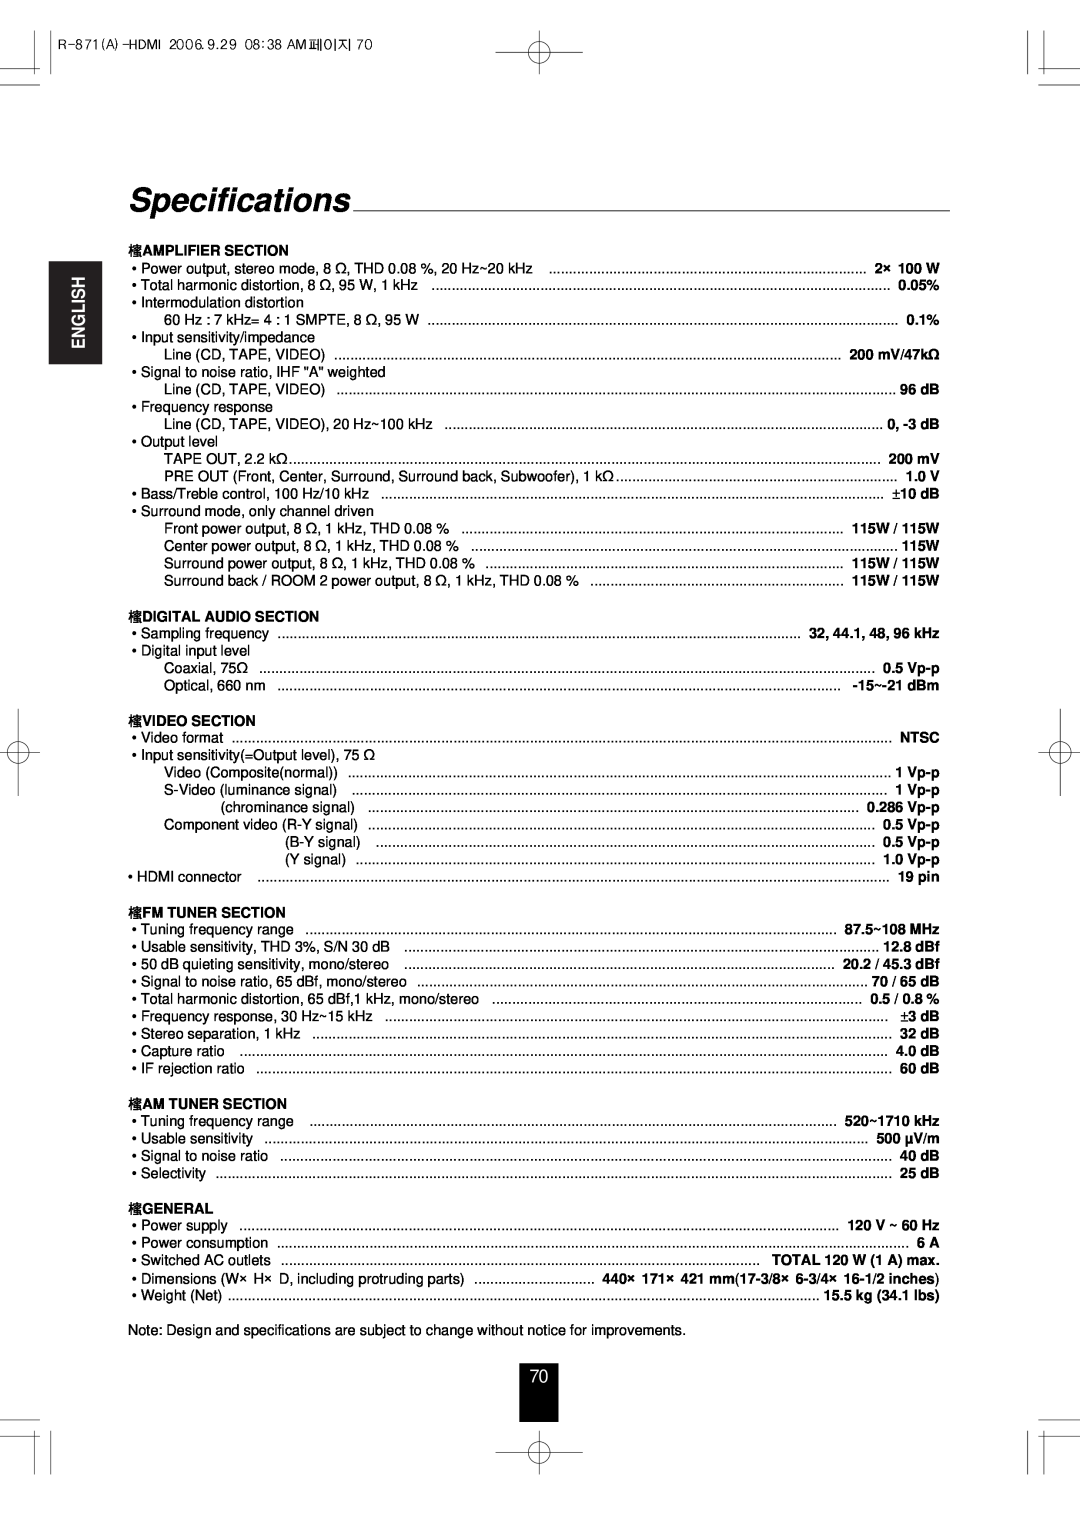 Sherwood R-871 manual Specifications, English 